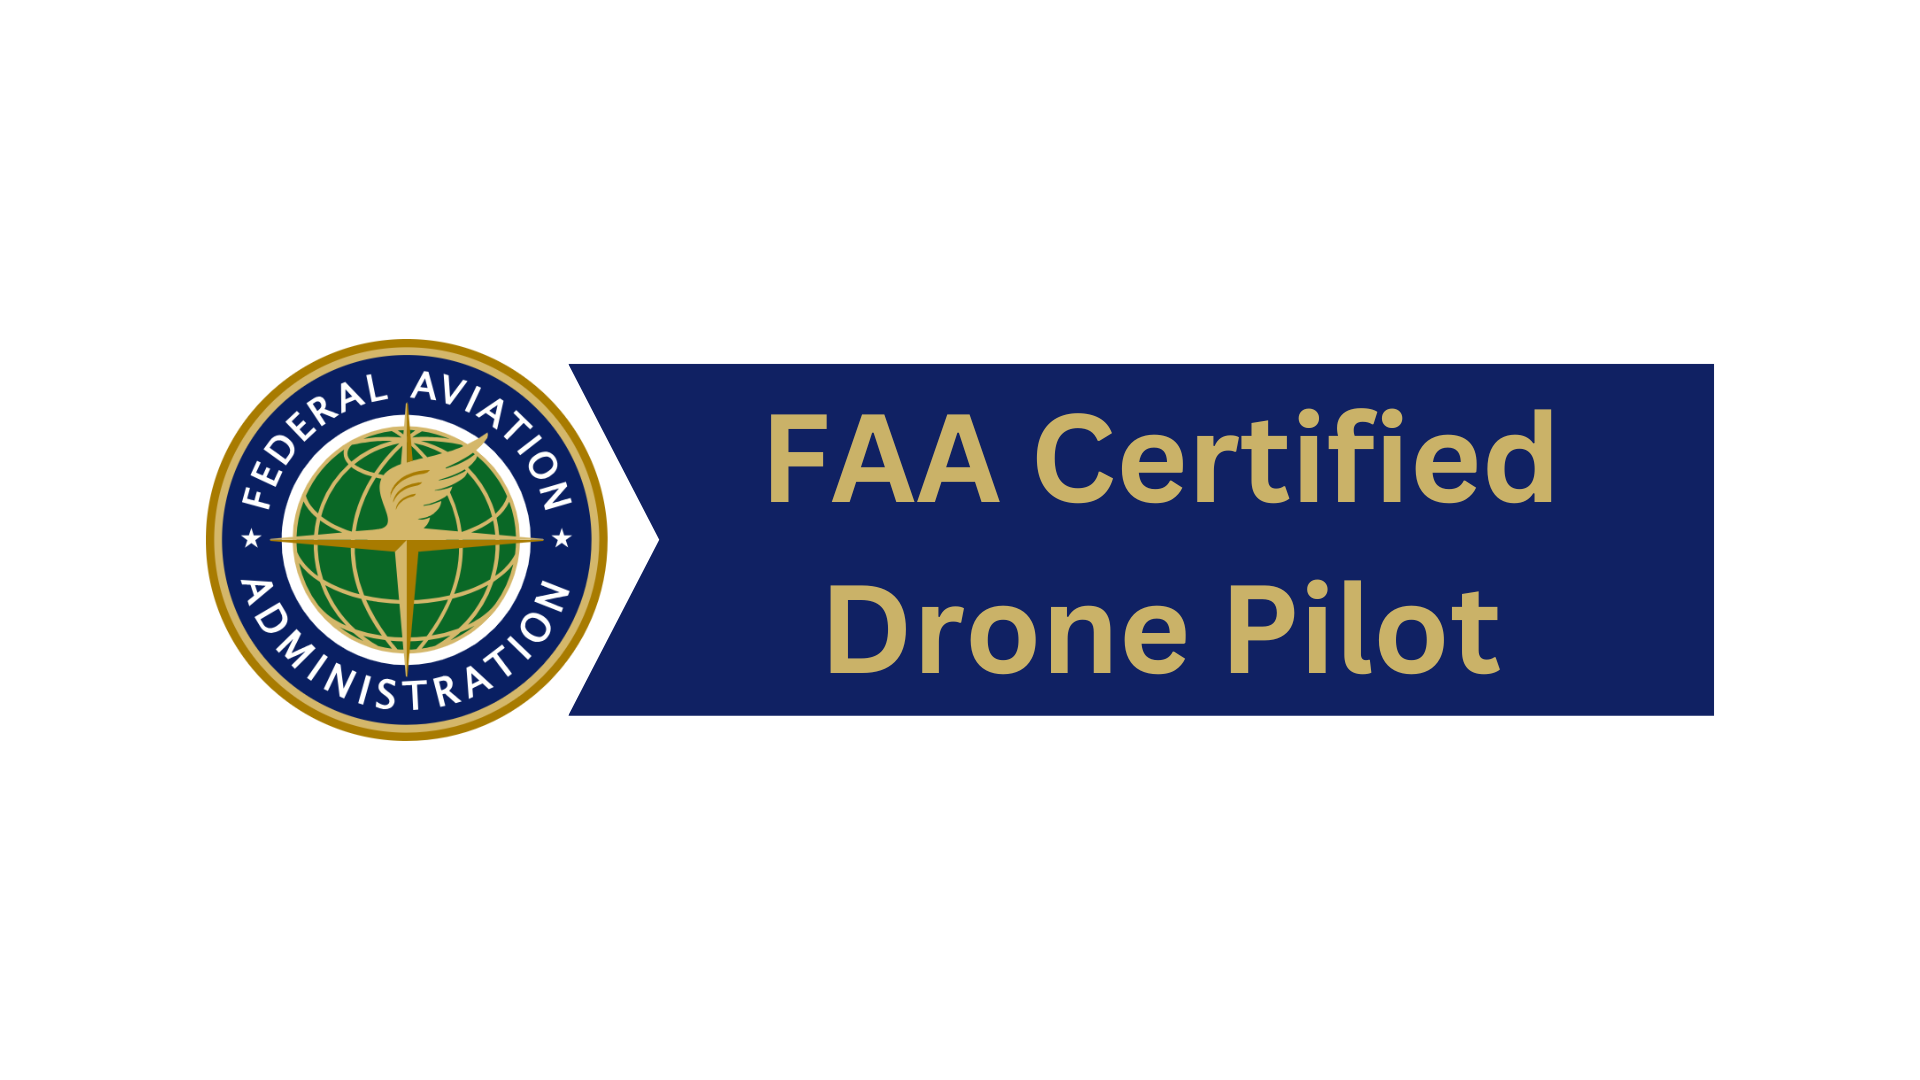 the FAA logo with the words Faa Certified